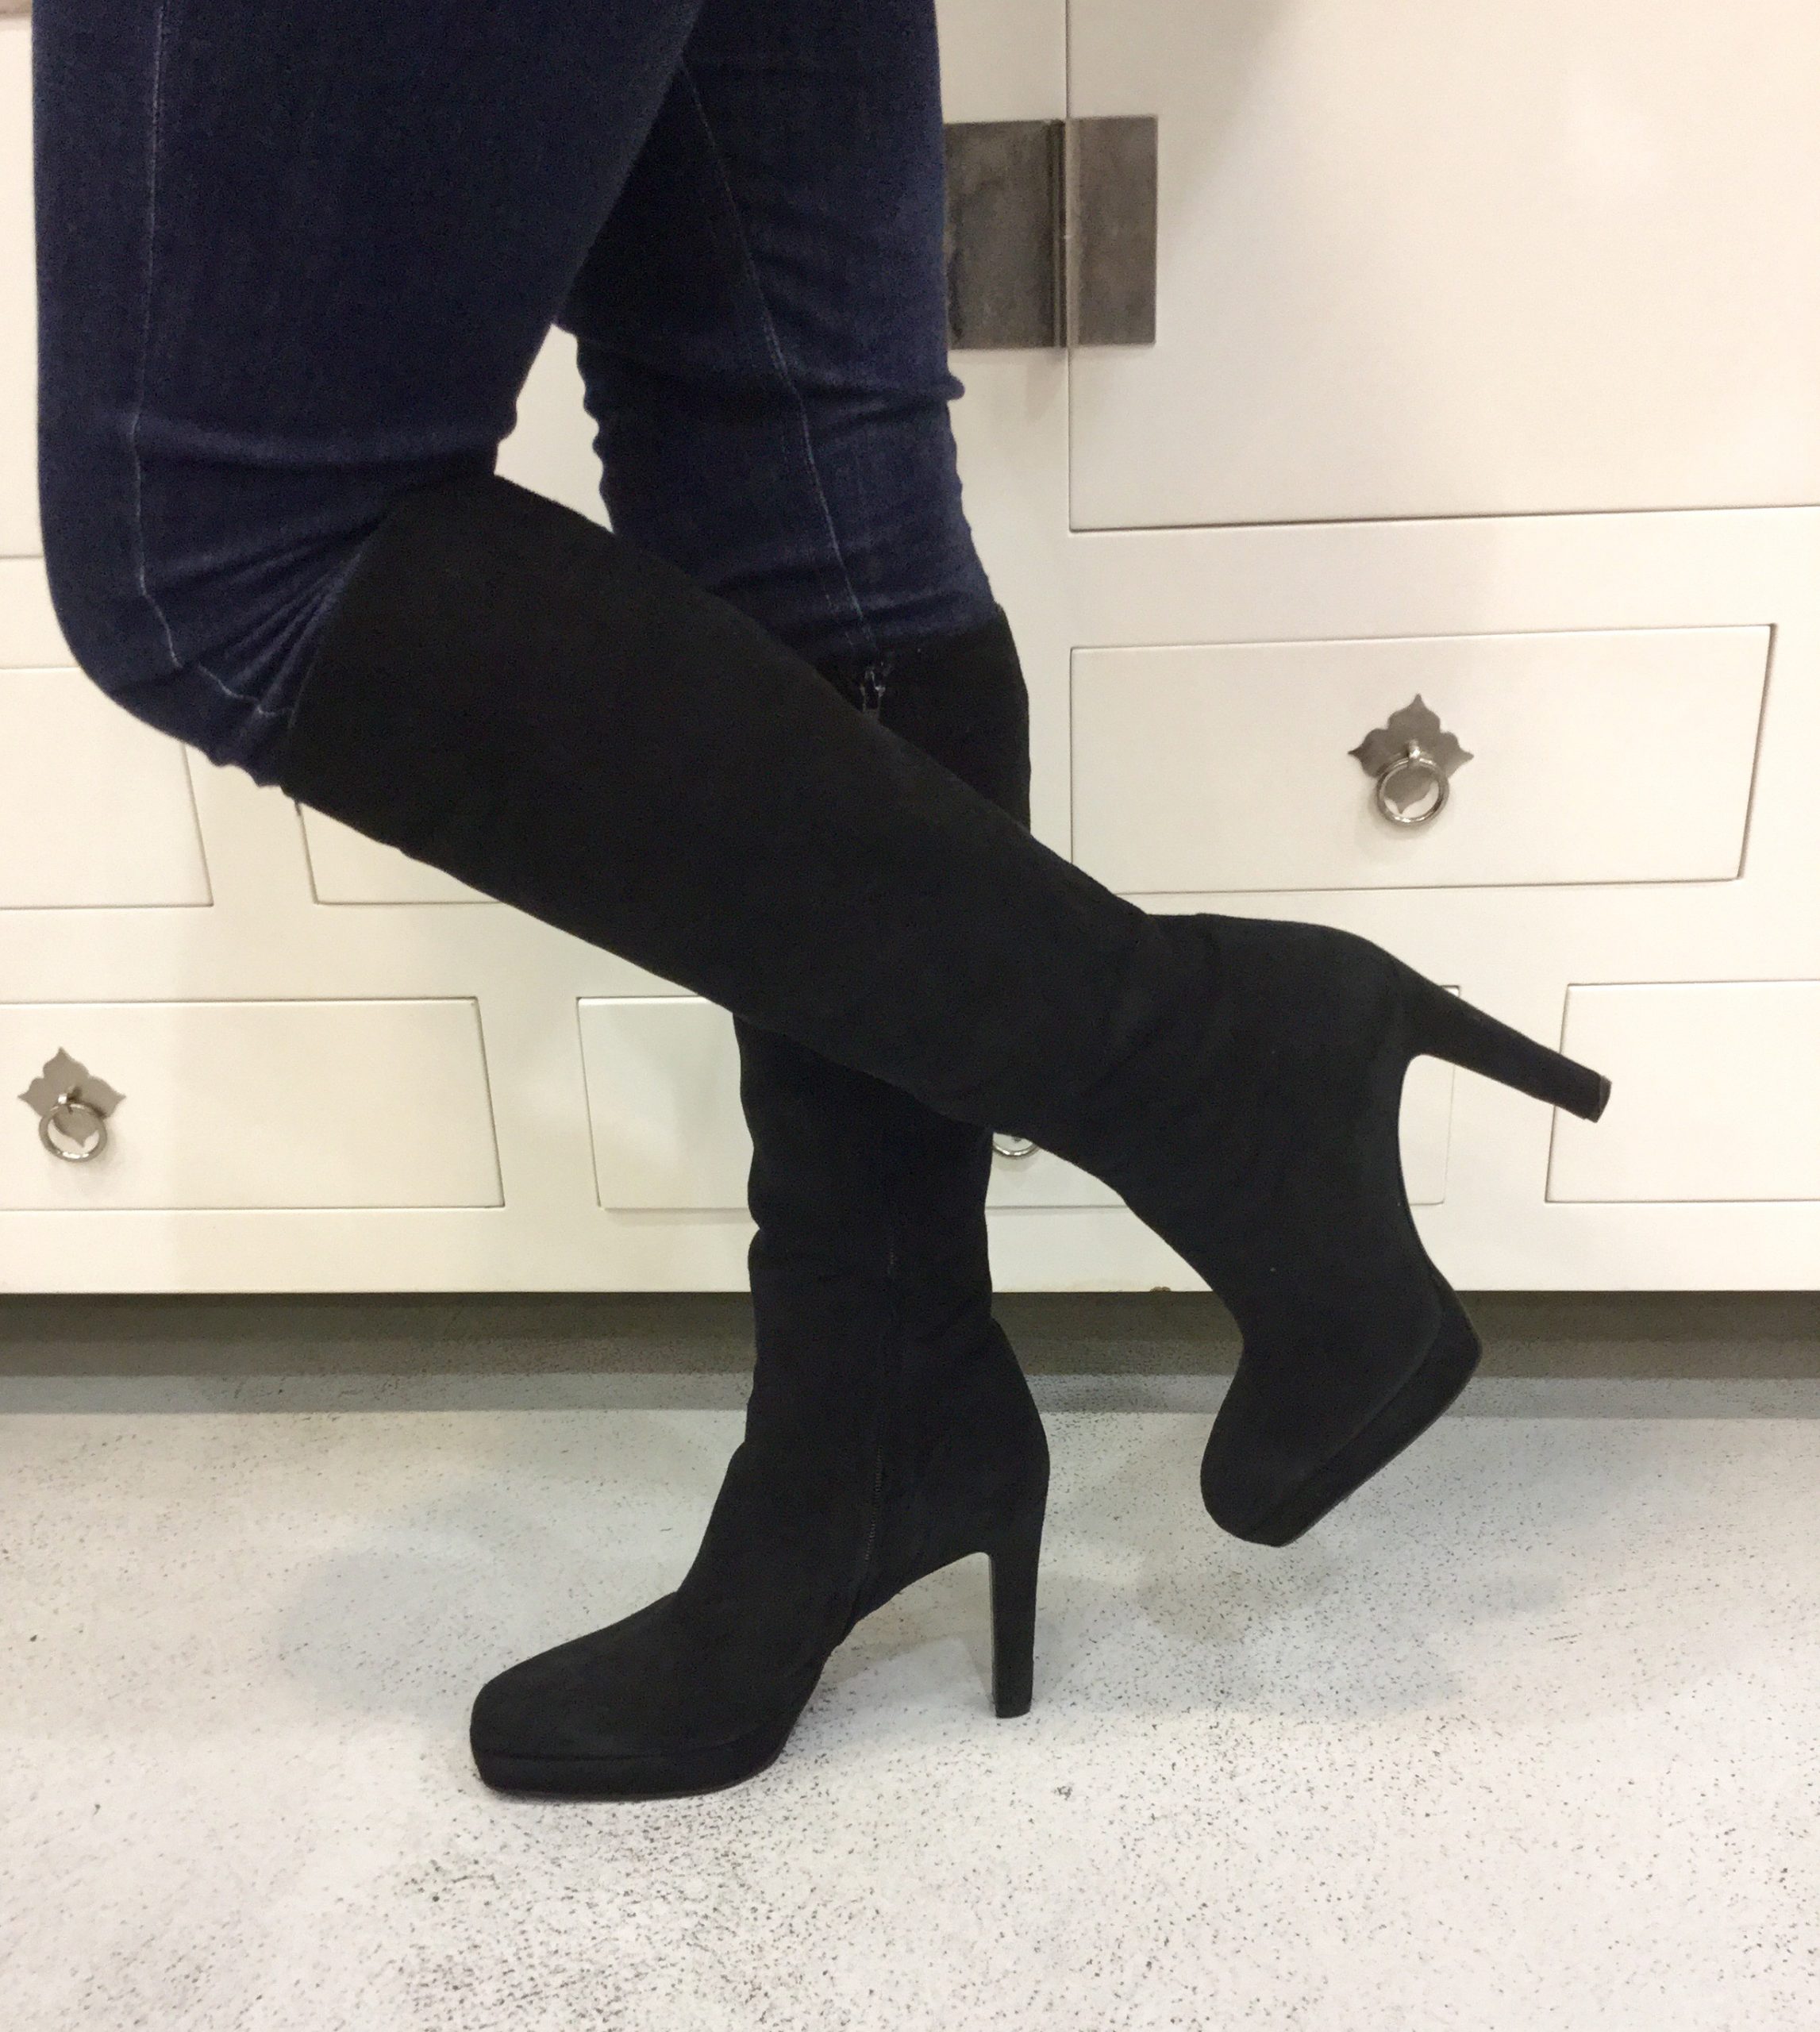 zPre-Owned Gucci Black Suede Tall Boots 